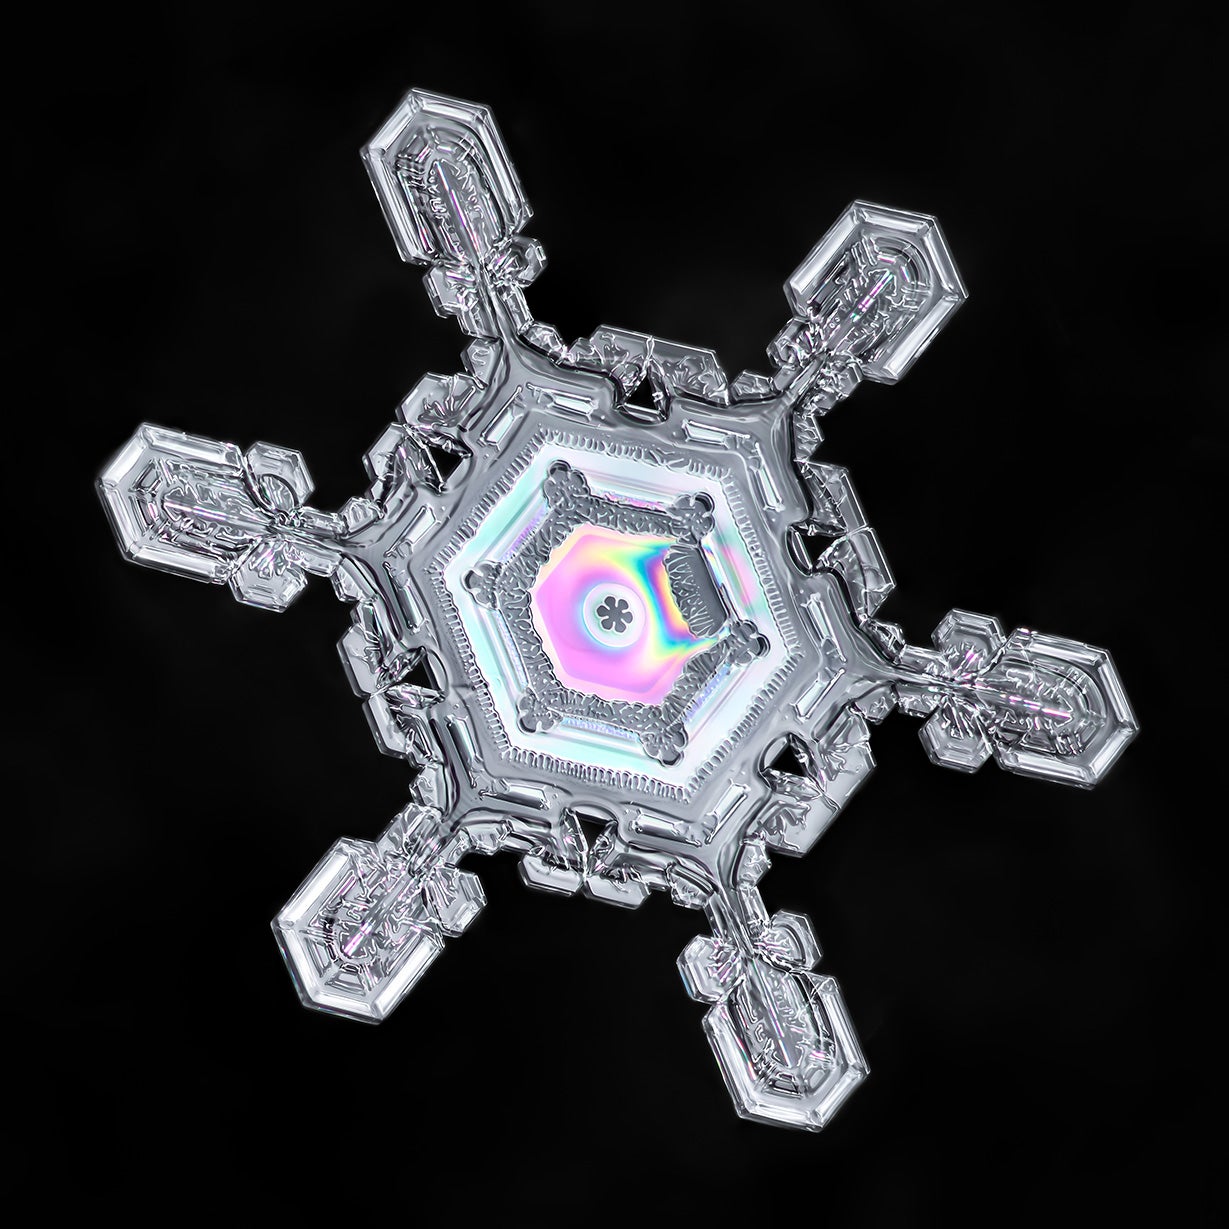 Snowflake Structure Still Mystifies Physicists